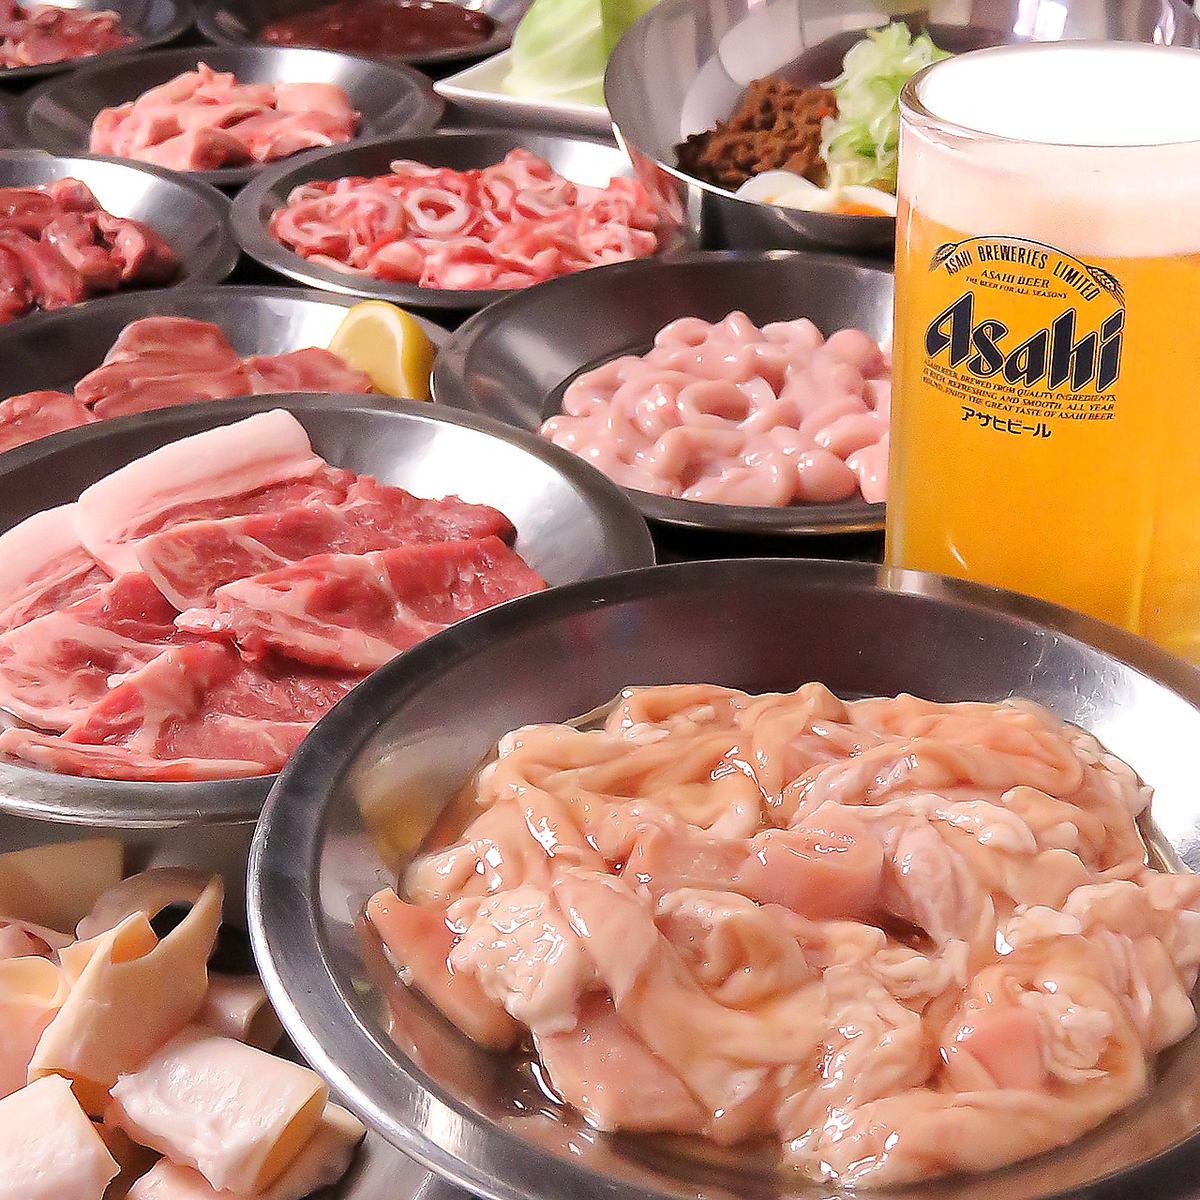 If you want to enjoy yakiniku in Hamamatsu, this is the place to go! You can enjoy delicious meat at a reasonable price♪